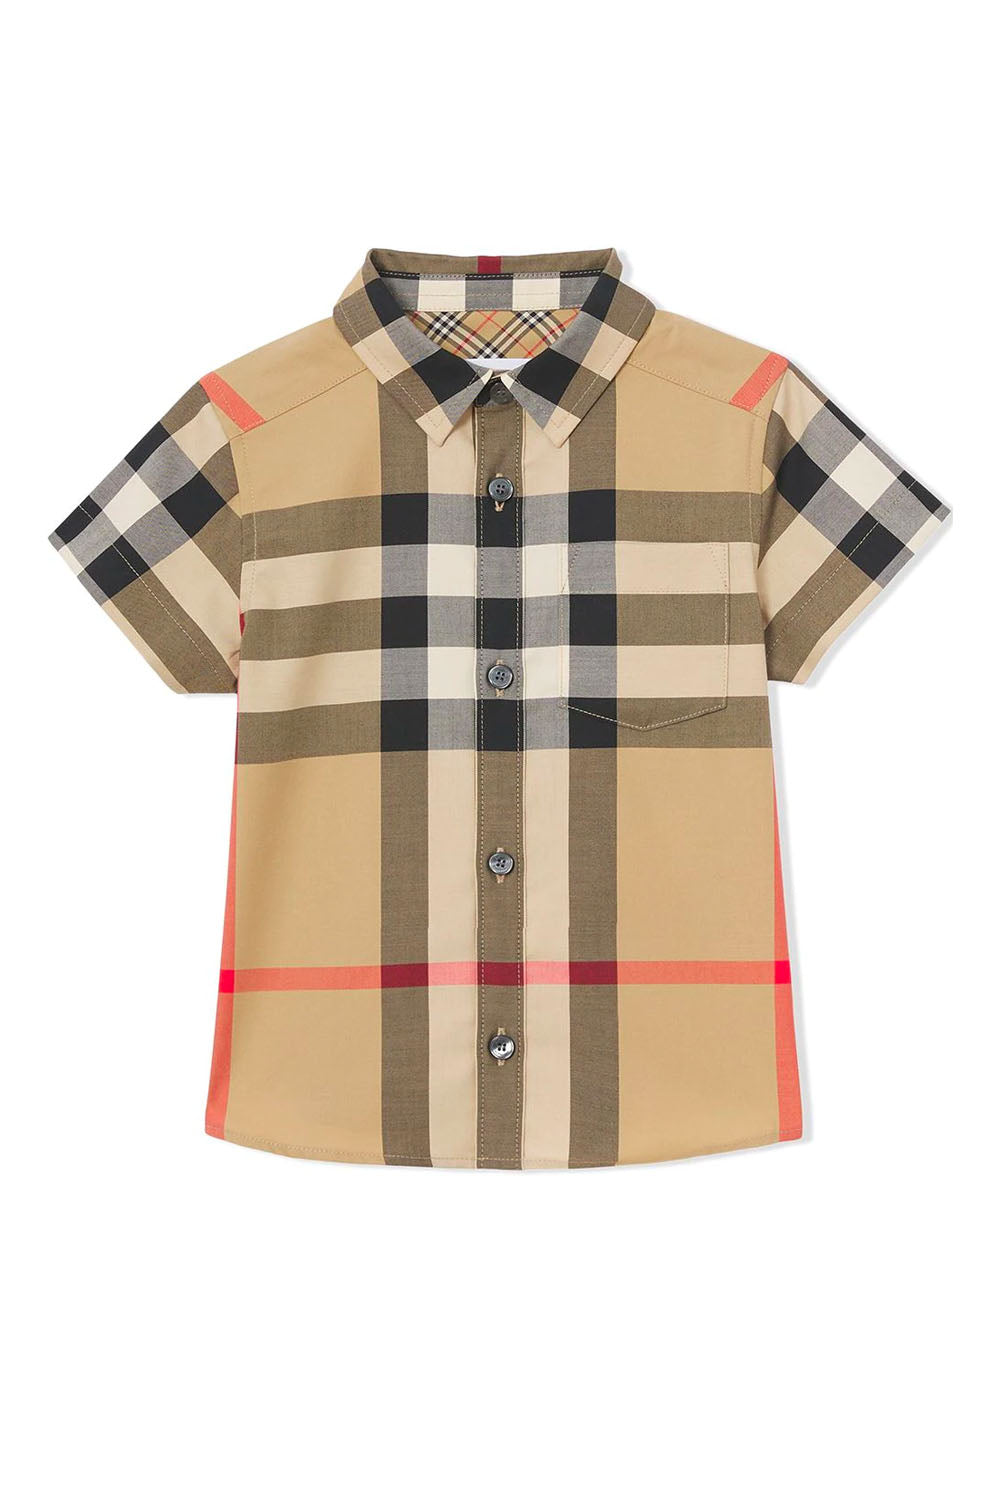 Cb Casual Shirts for Boys